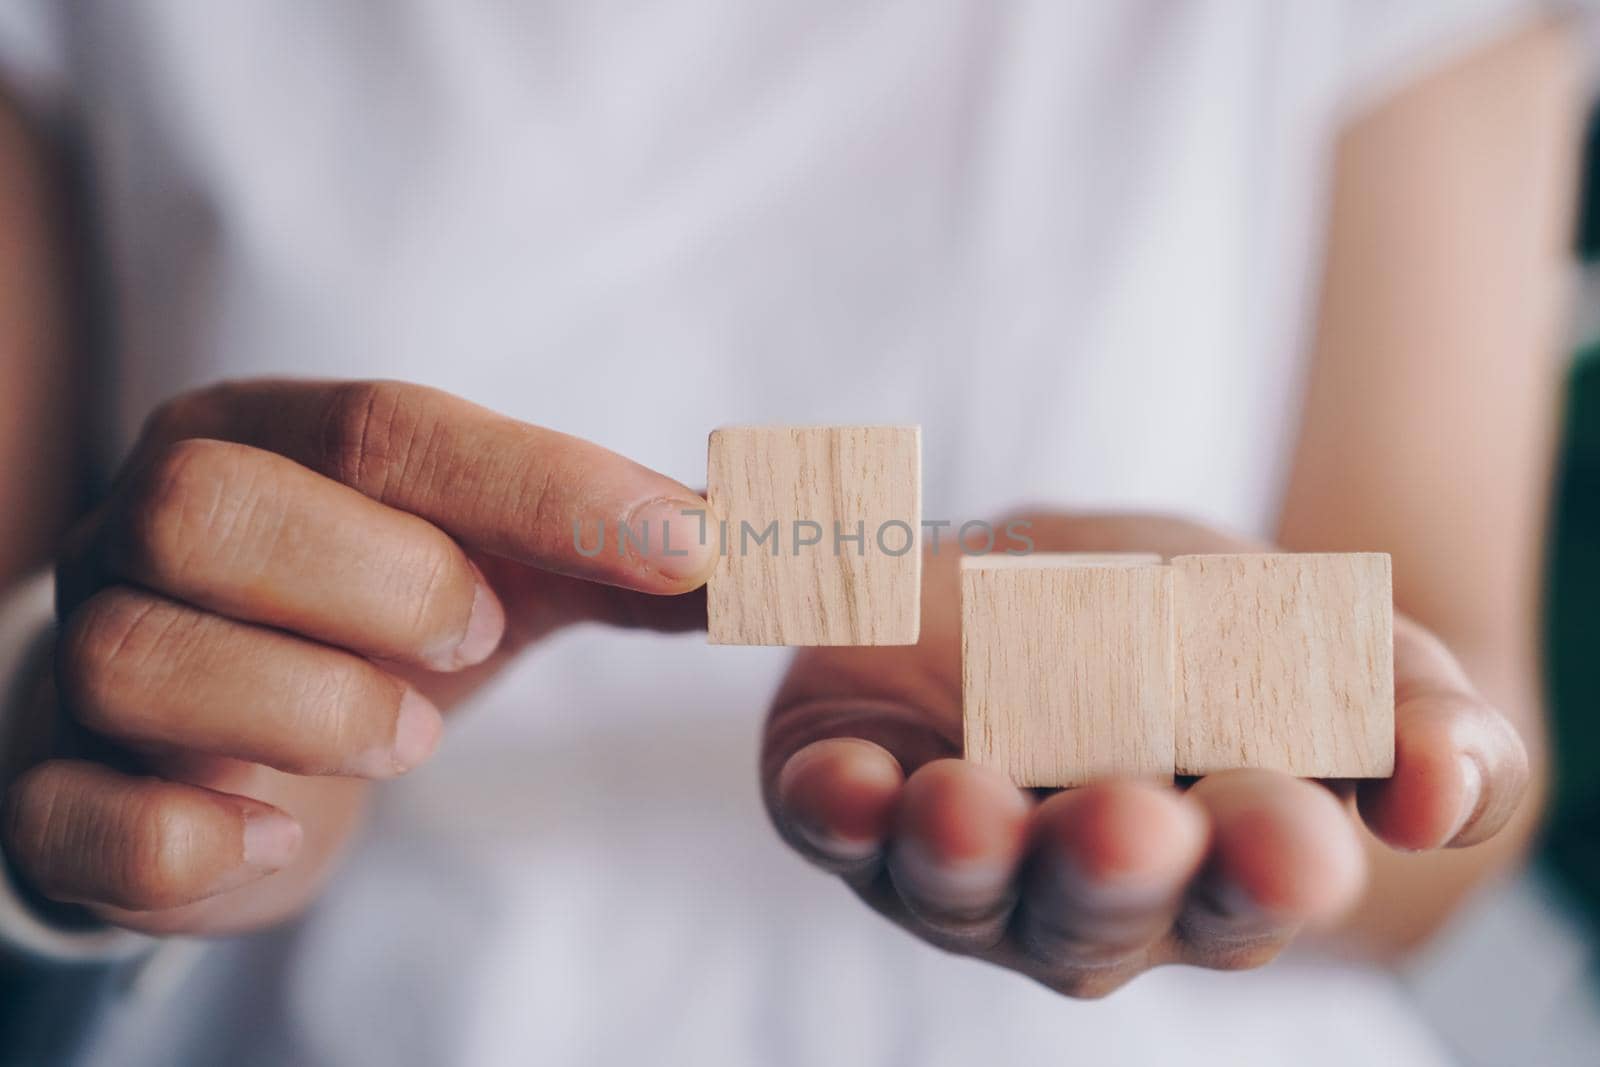 Blank wooden cube that you can put text or icon on in hand hold by Suwant